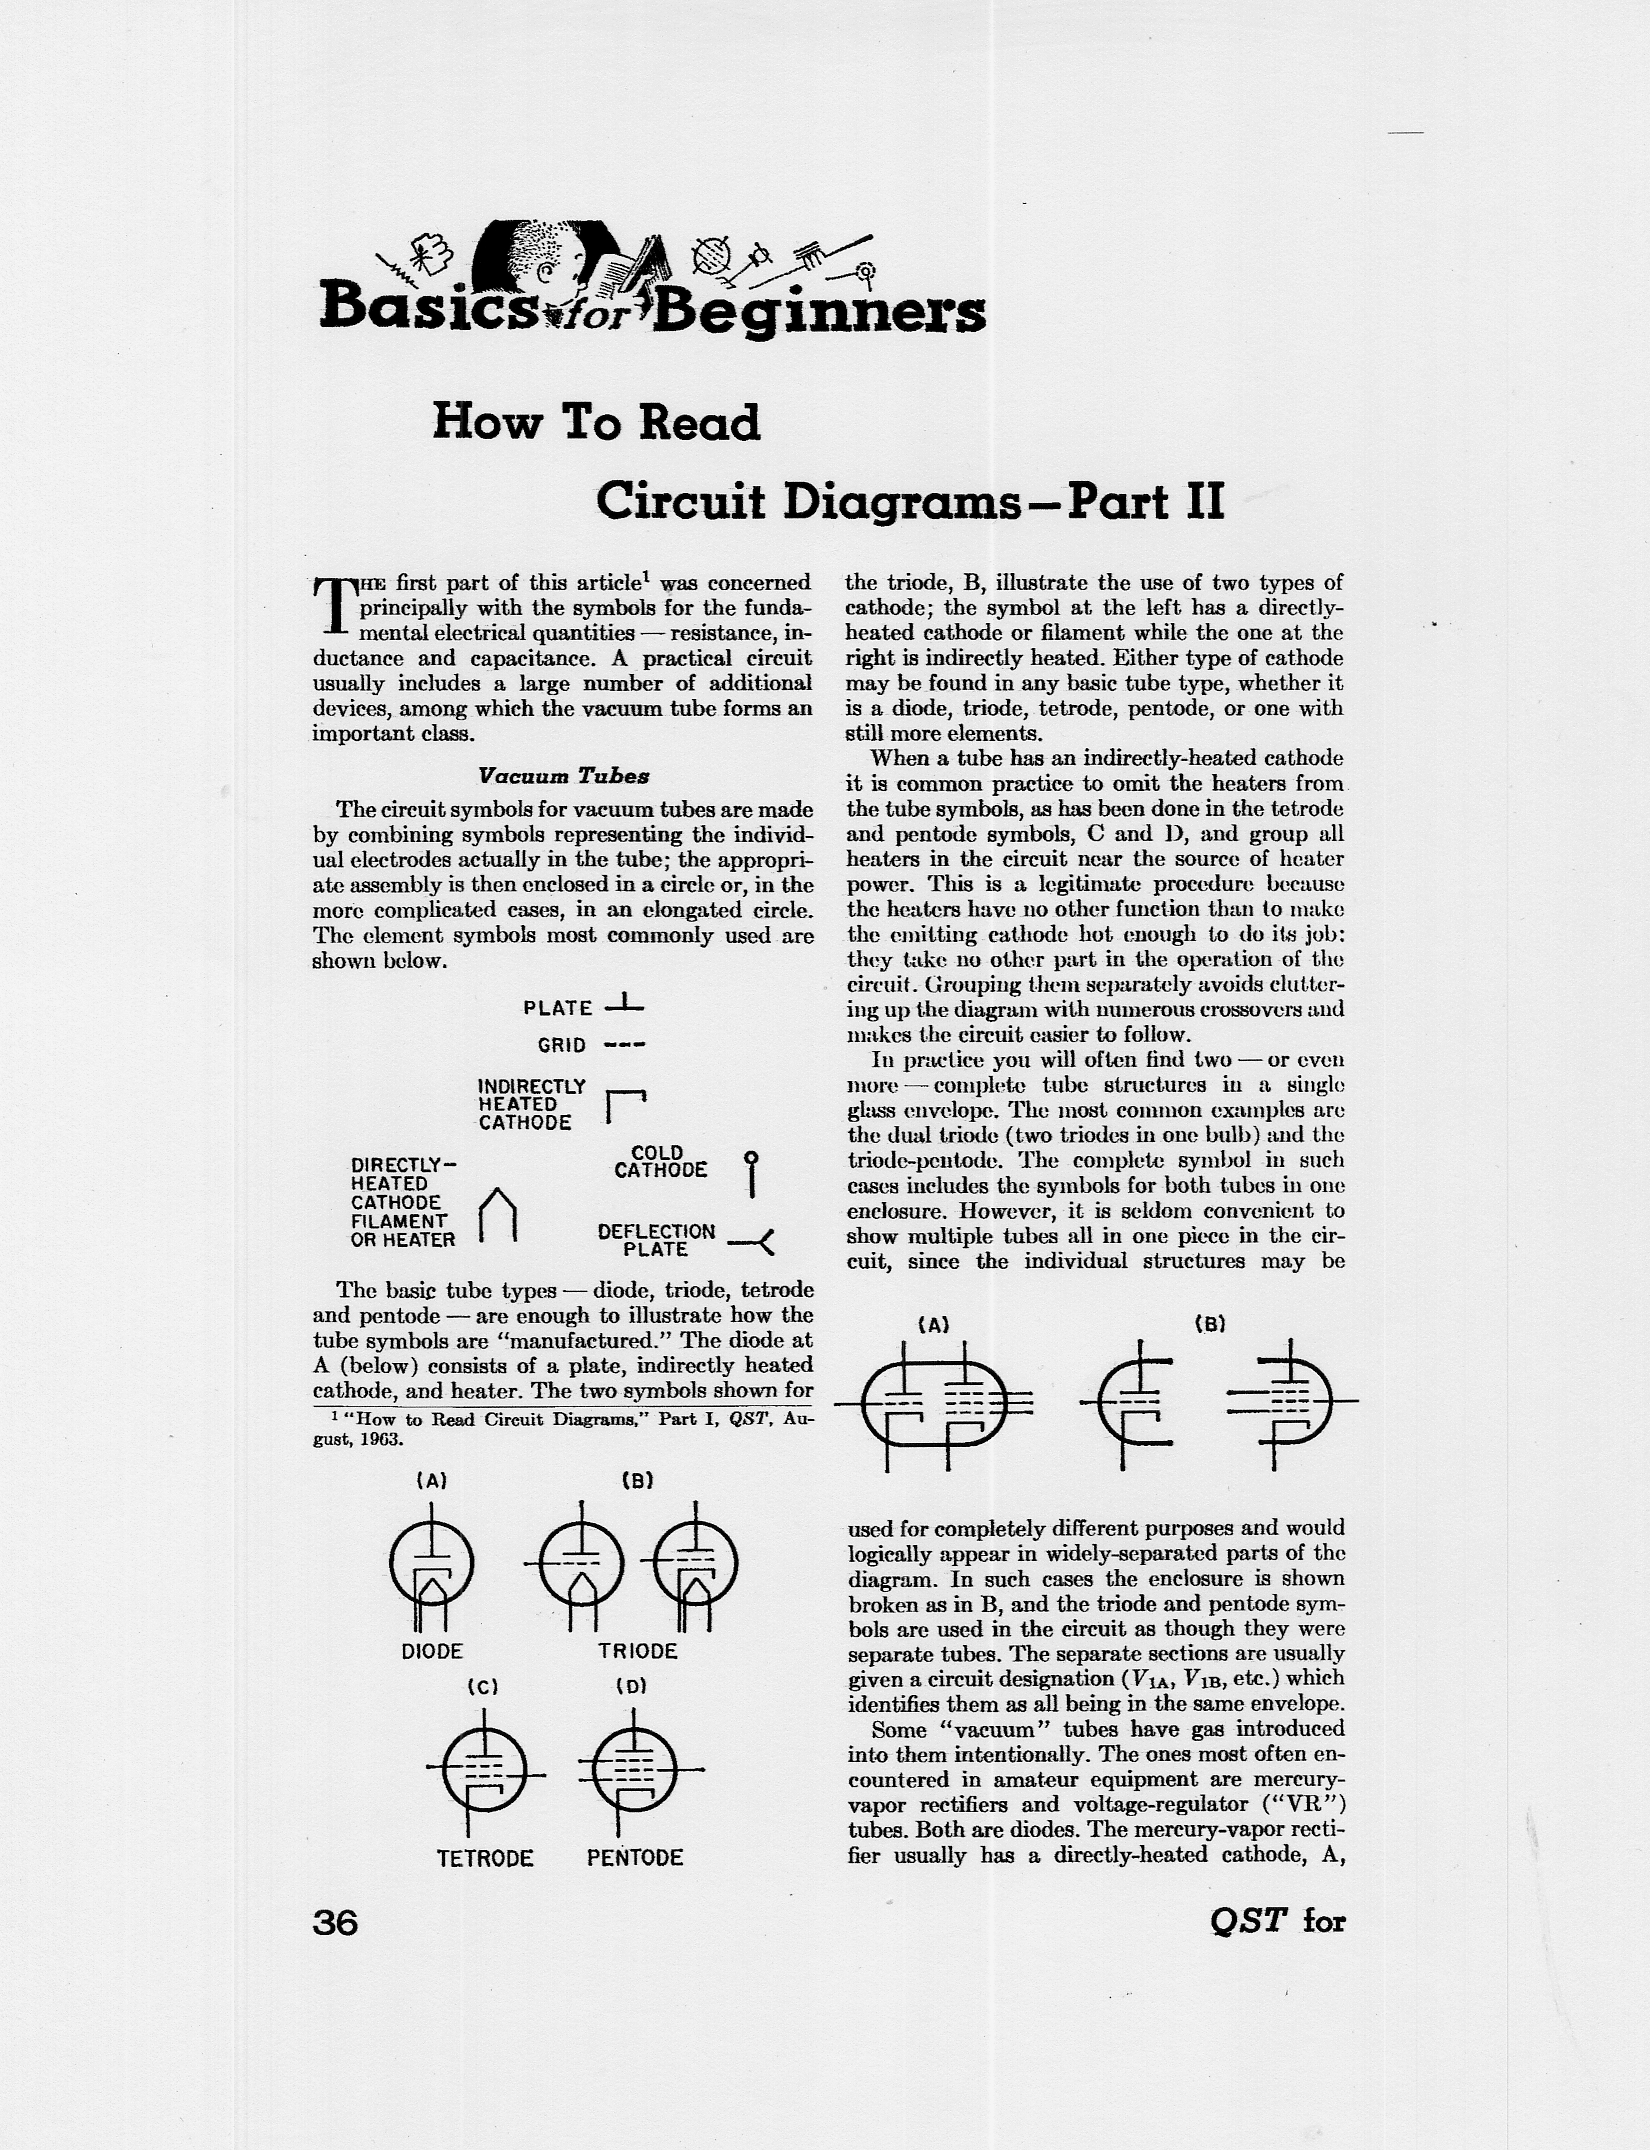 How to Read Circuit Diagrams, Part II-6309036